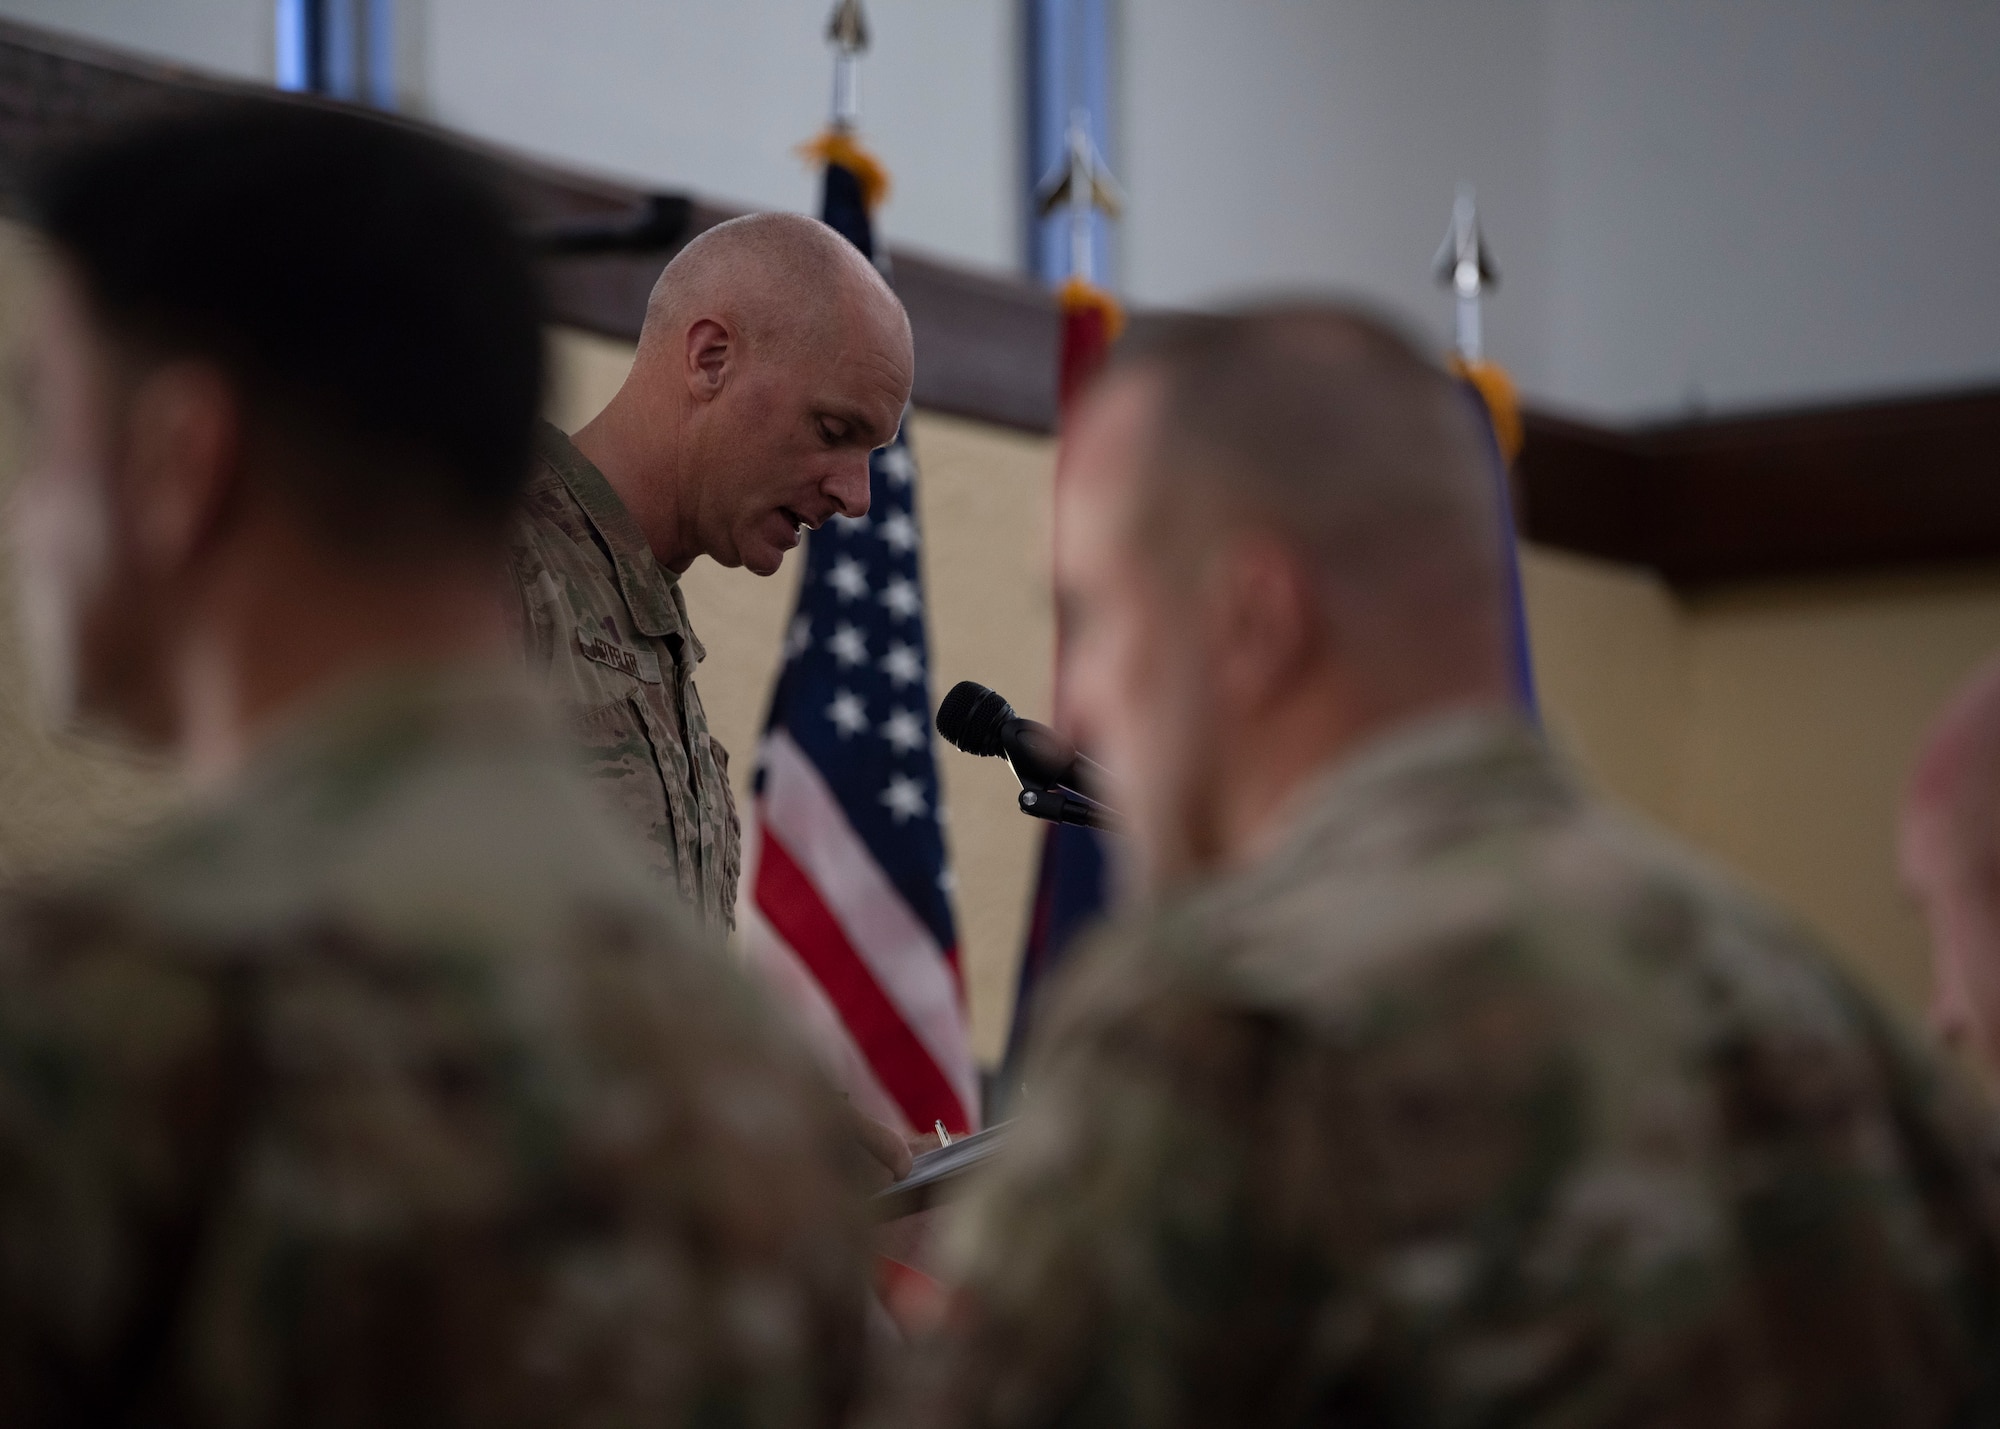 Capt. Jaime Stiffler, 36th Wing chaplain, gives the invocation during a ceremony Sept. 10, 2019 on Andersen Air Force Base, Guam.